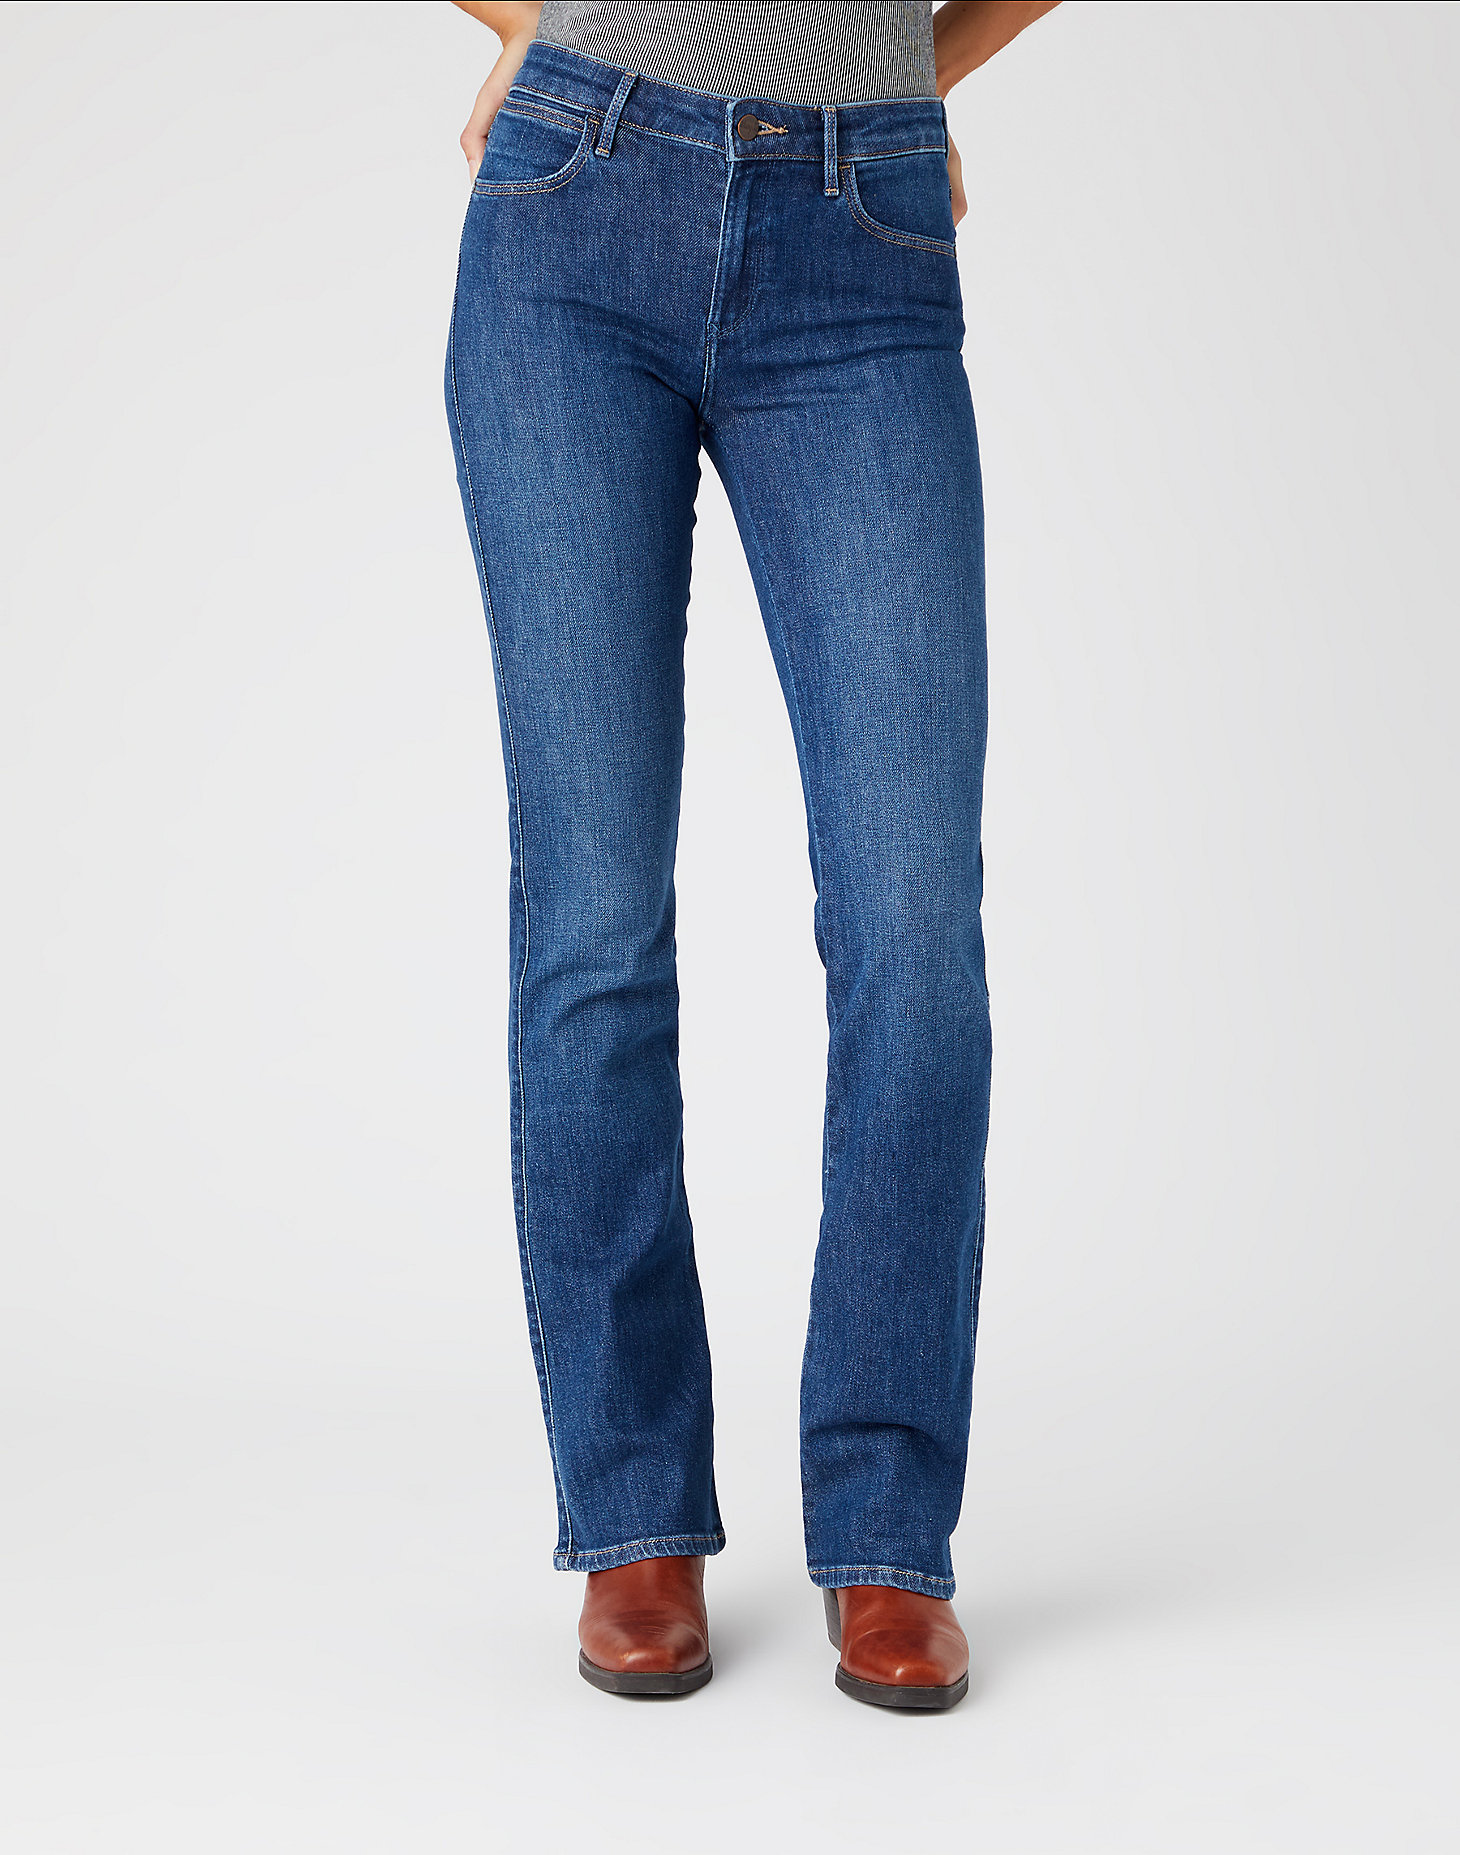 Bootcut Jeans in Good Life alternative view 1